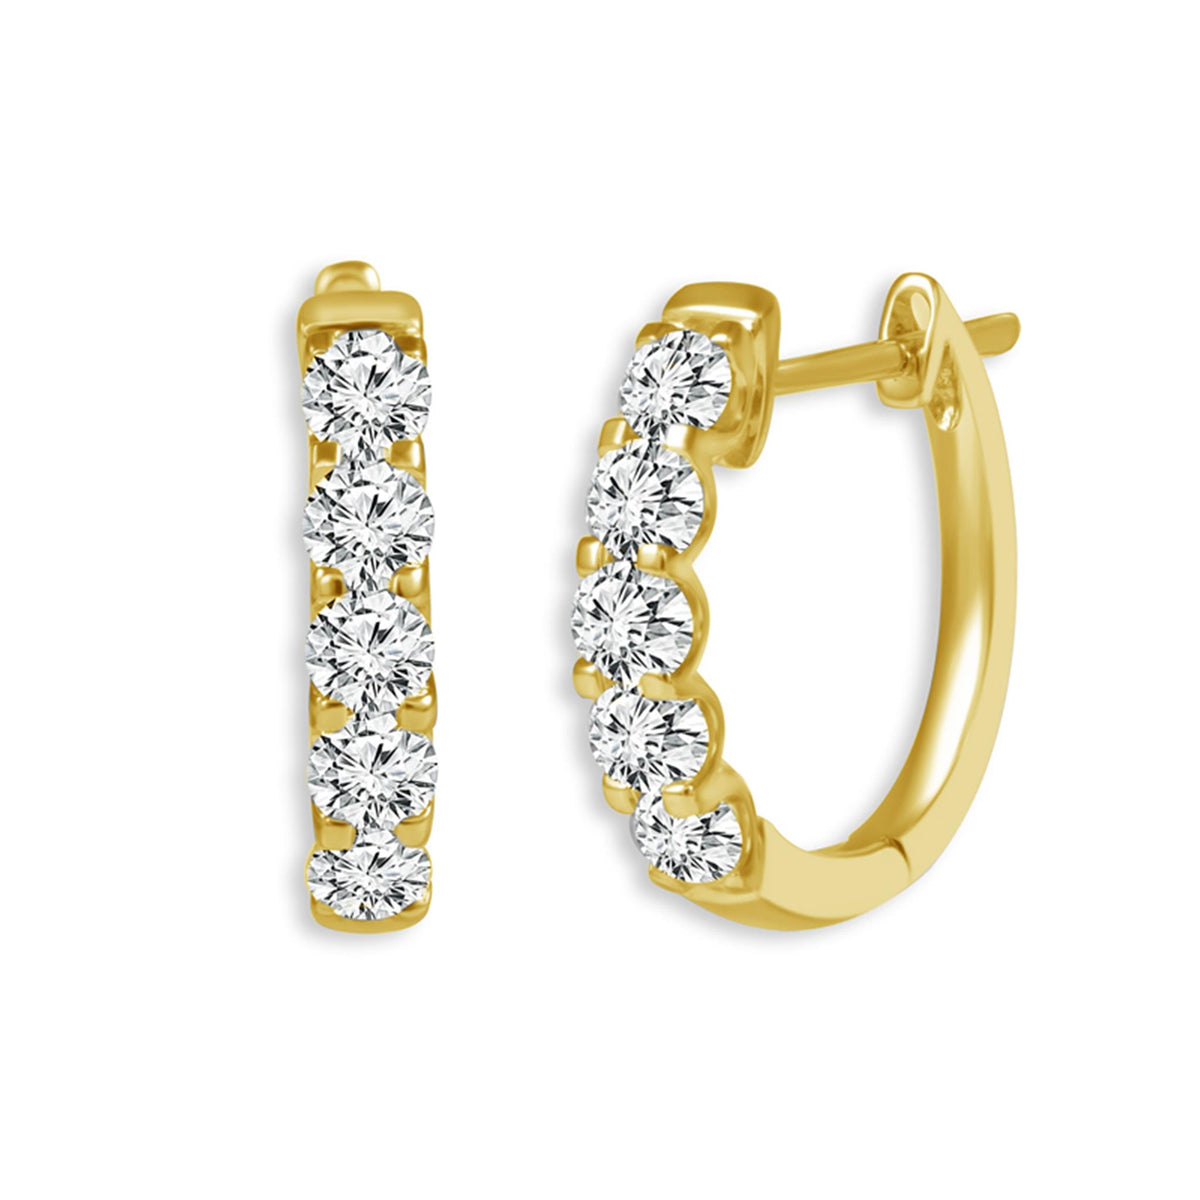 14Kt Yellow Gold Oval Hoop Earrings With 1.00cttw Natural Diamonds